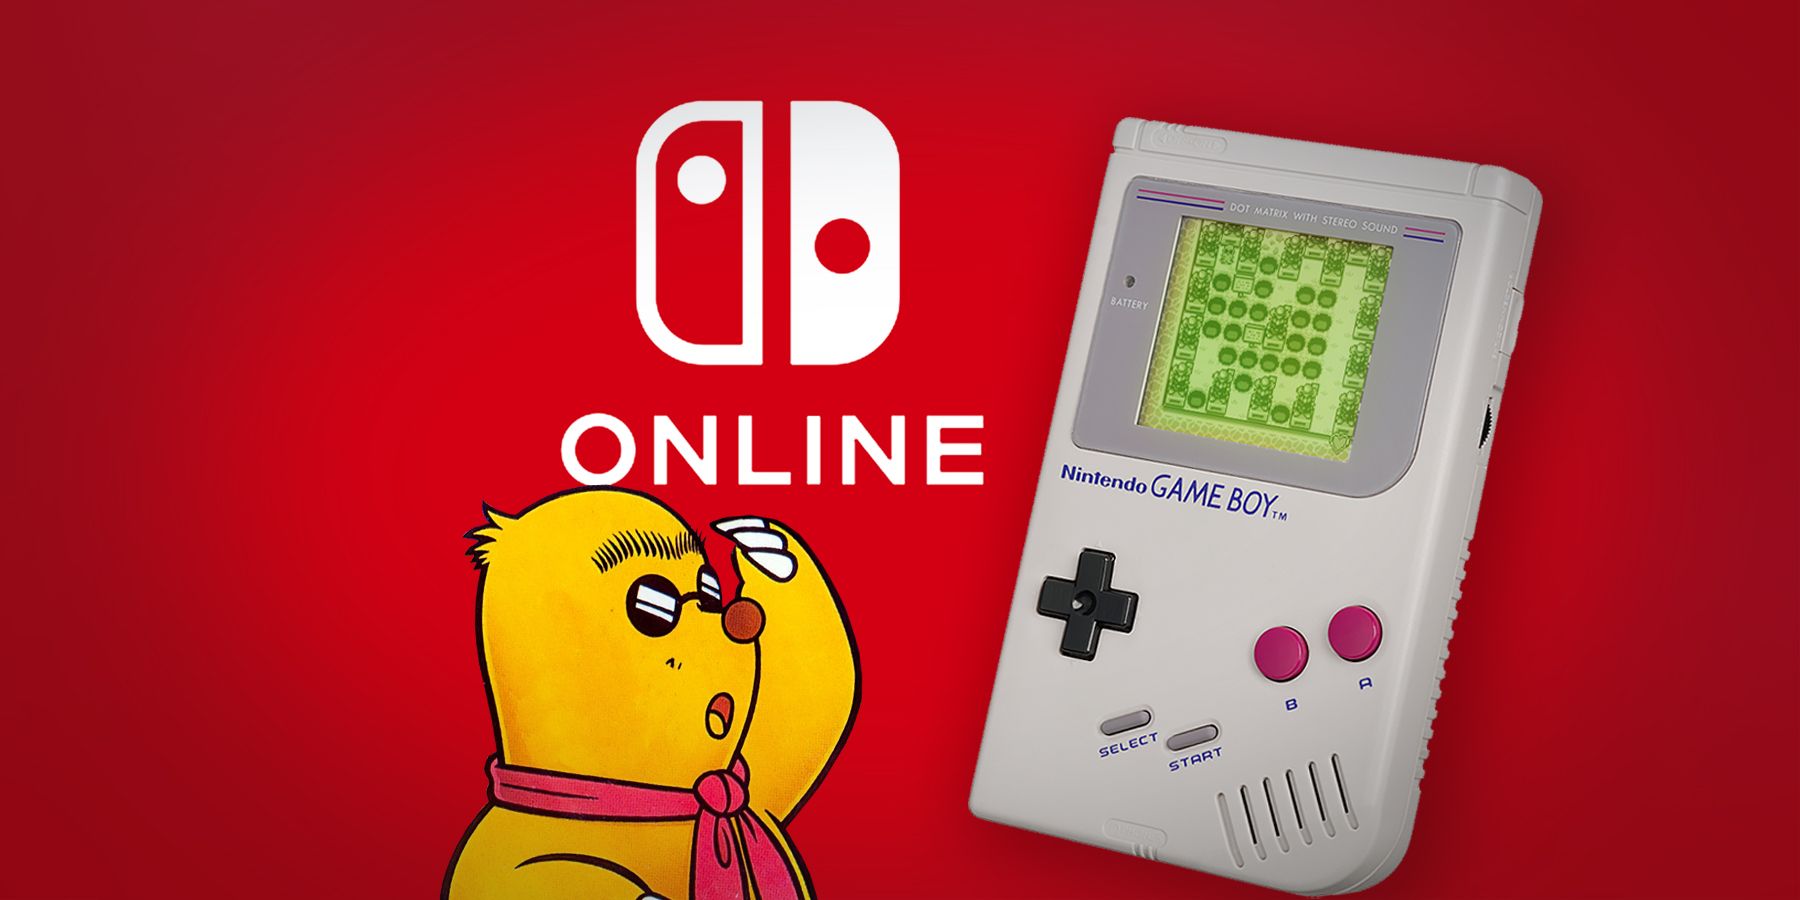 Obscure Game Boy Games That Would Be Great for Nintendo Switch Online